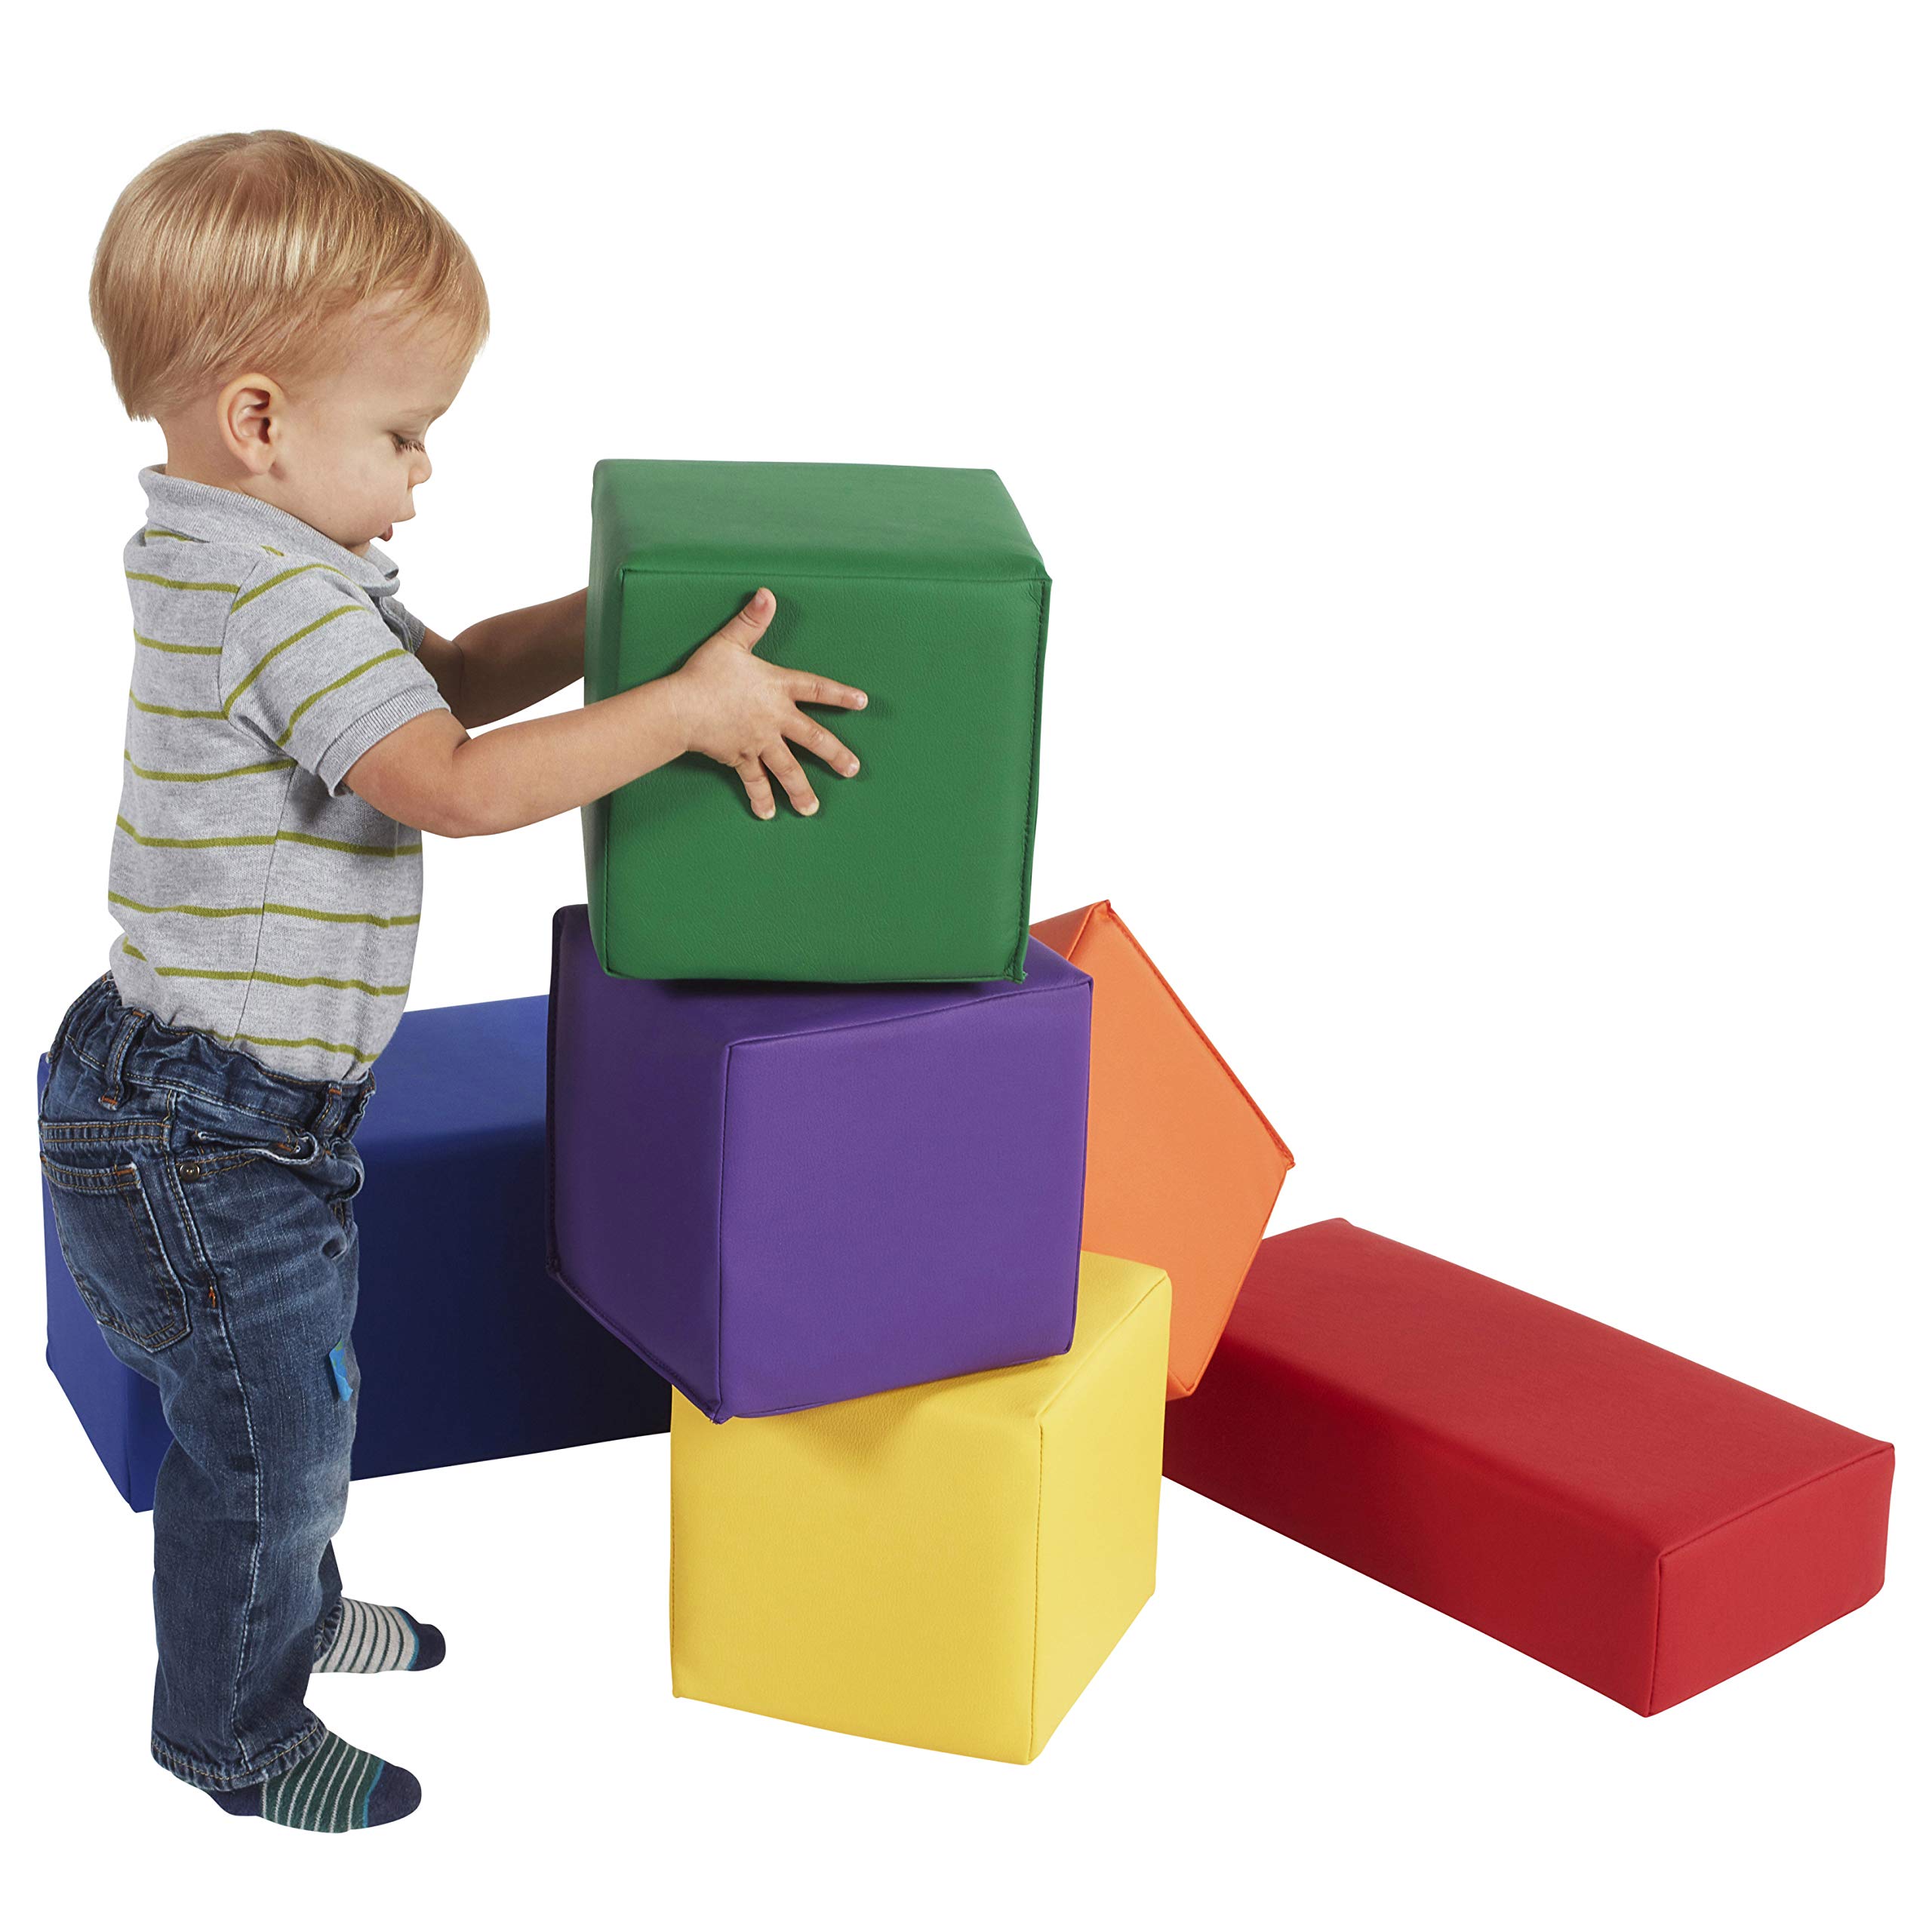 Factory Direct Partners 10414-AS SoftScape Stack-a-Block Big Foam Construction Building Blocks, Soft Play Set for Toddlers and Kids (6-Piece Set) - Assorted